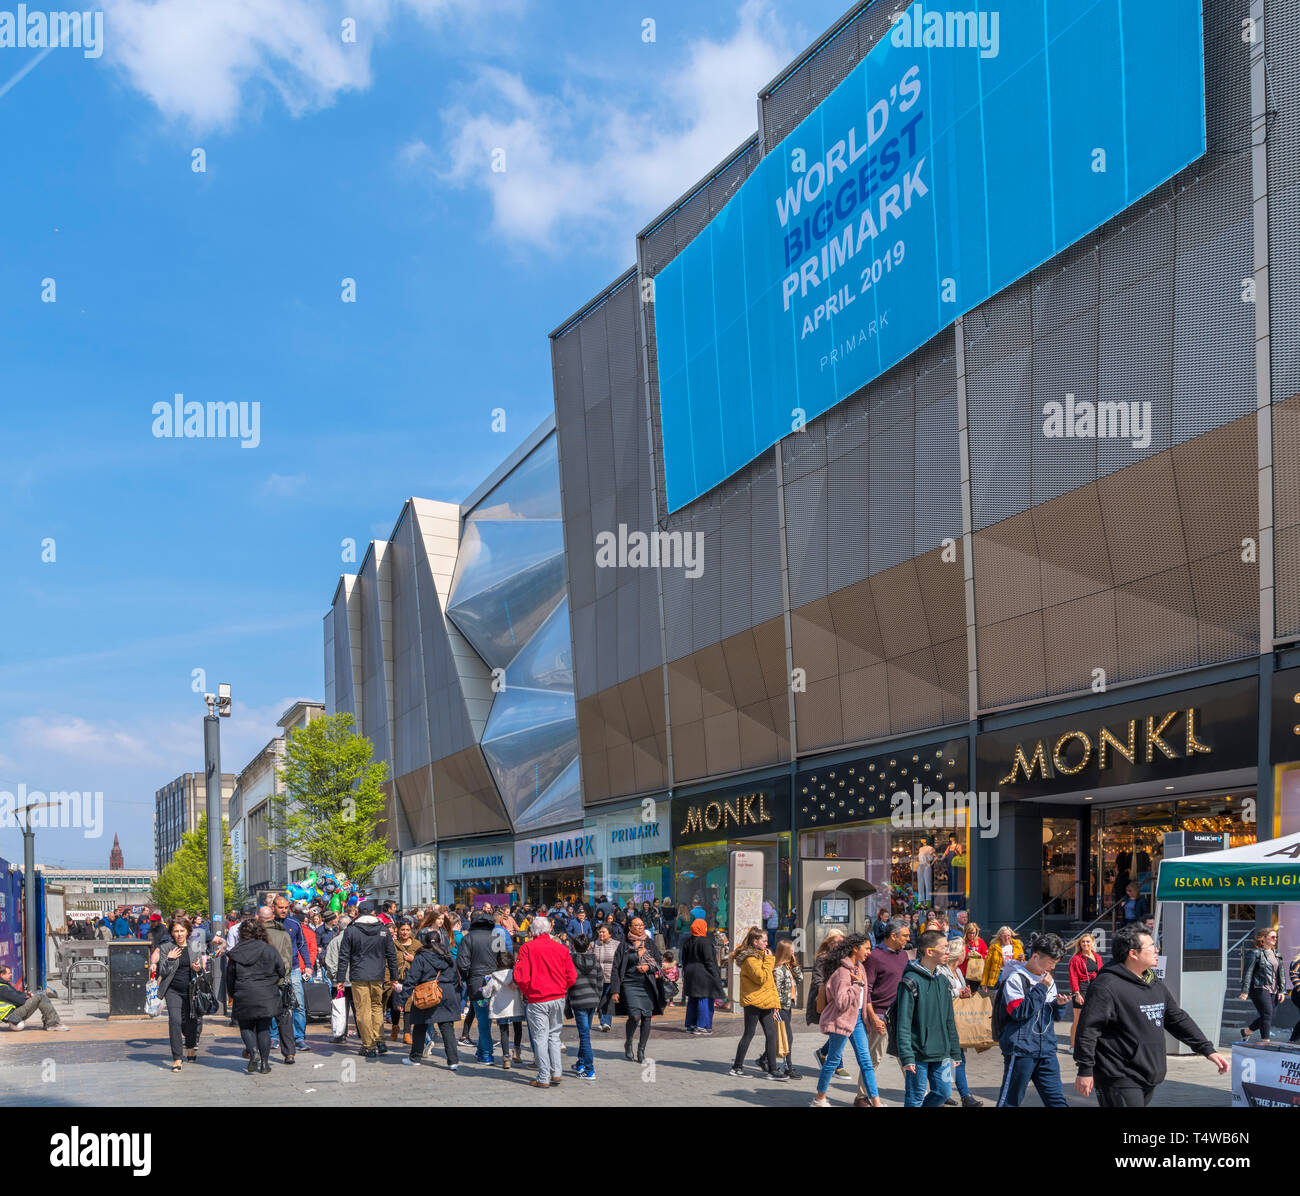 The world's largest Primark store (opened in April 2019) on High Street, Birmingham, West Midlands, England, UK Stock Photo